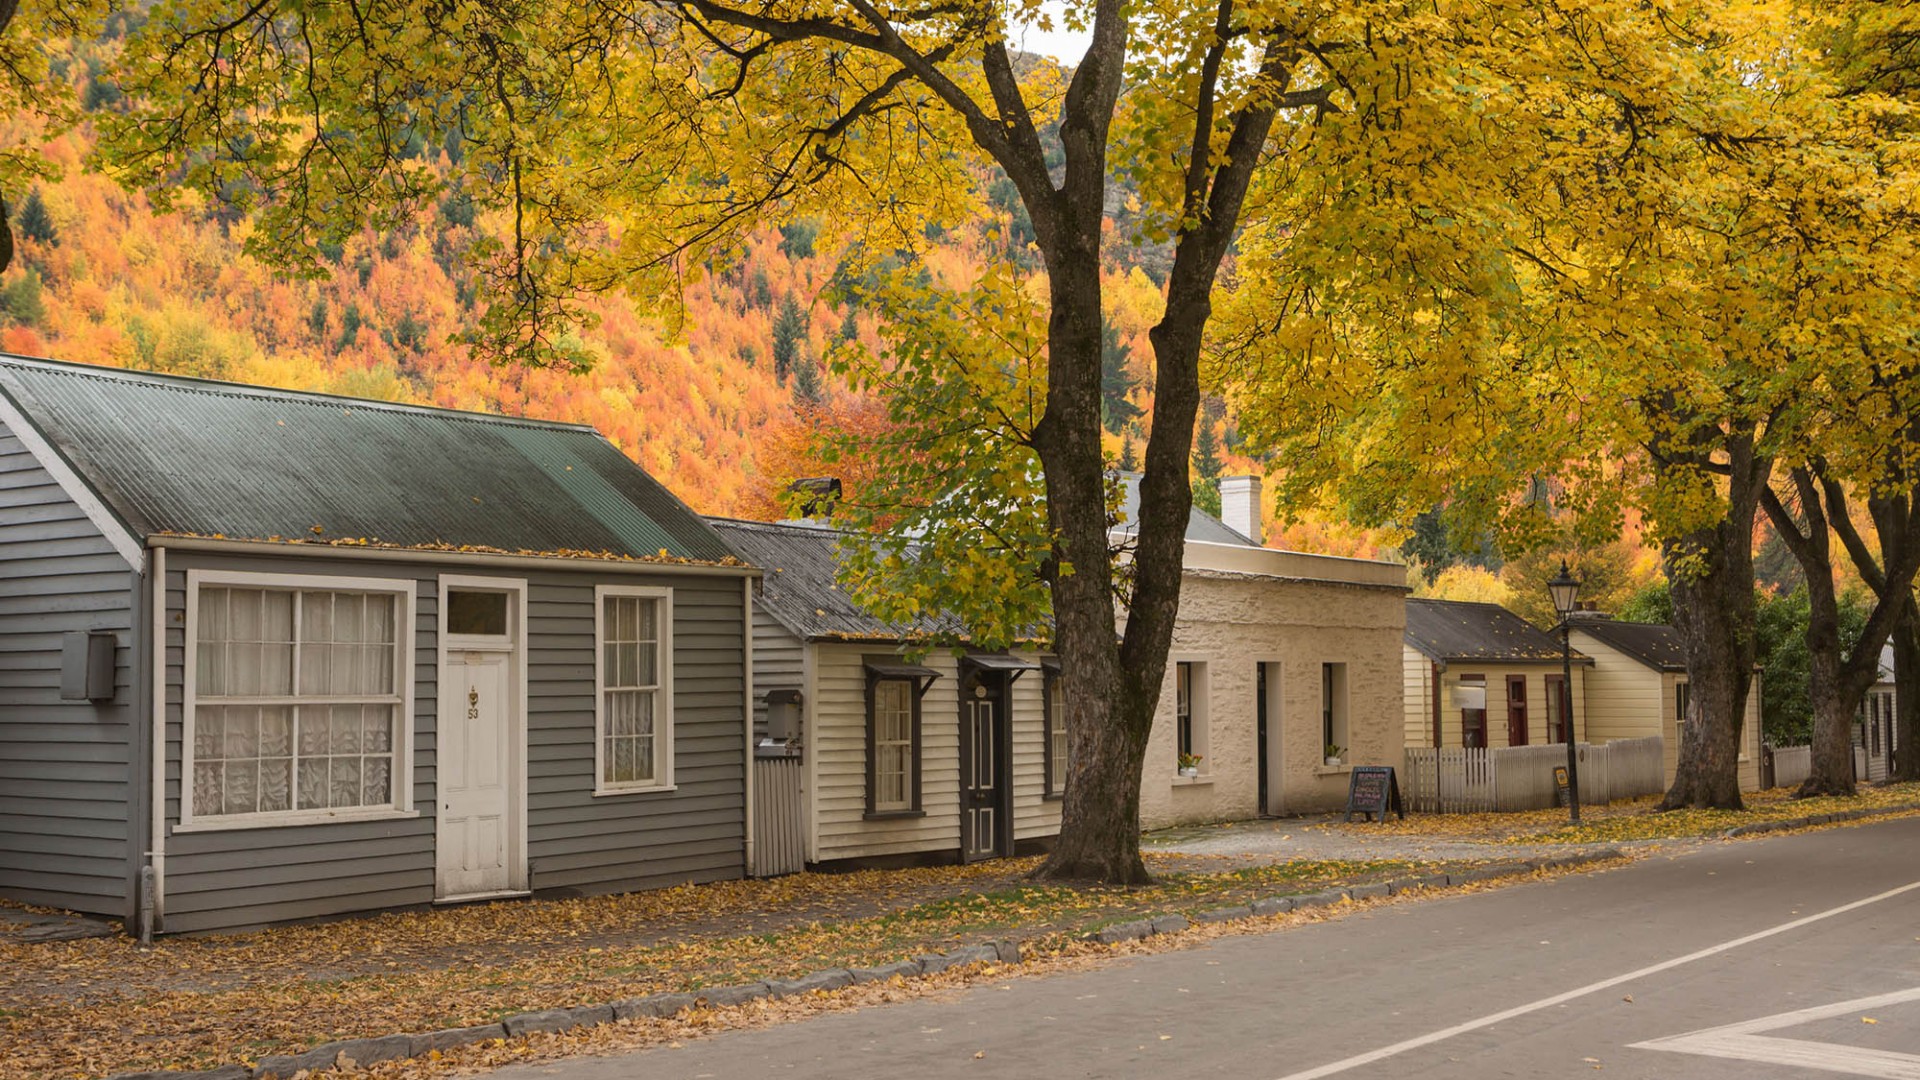 Miners Cottages, Arrowtown in Autumn